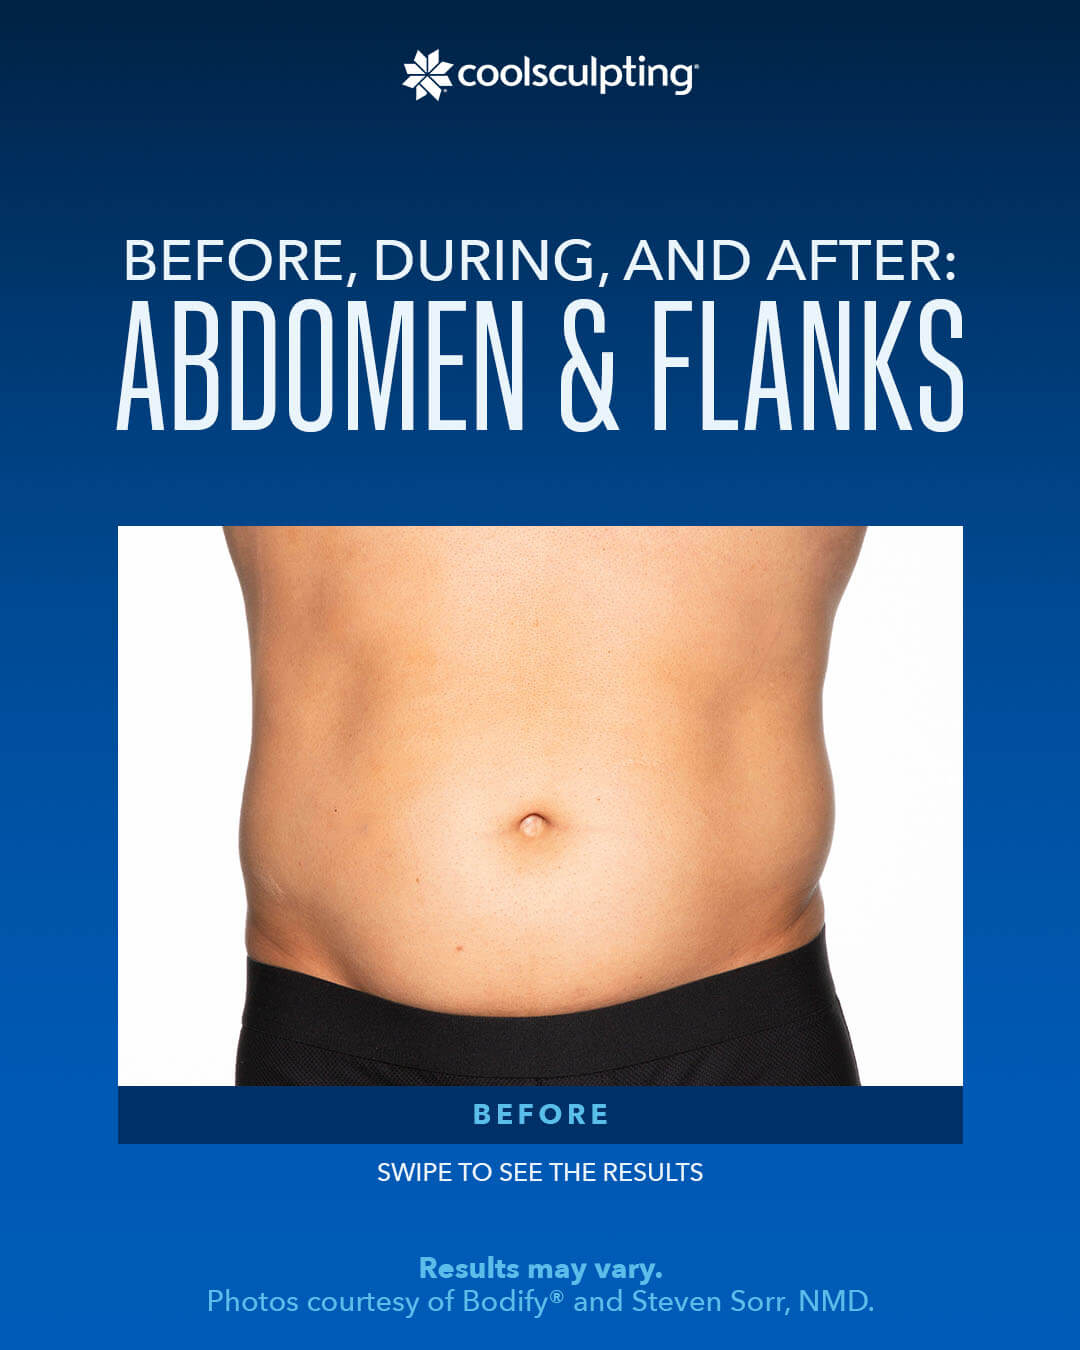 coolsculpting ,Before, During,AND After ABDOMEN &FLANKS